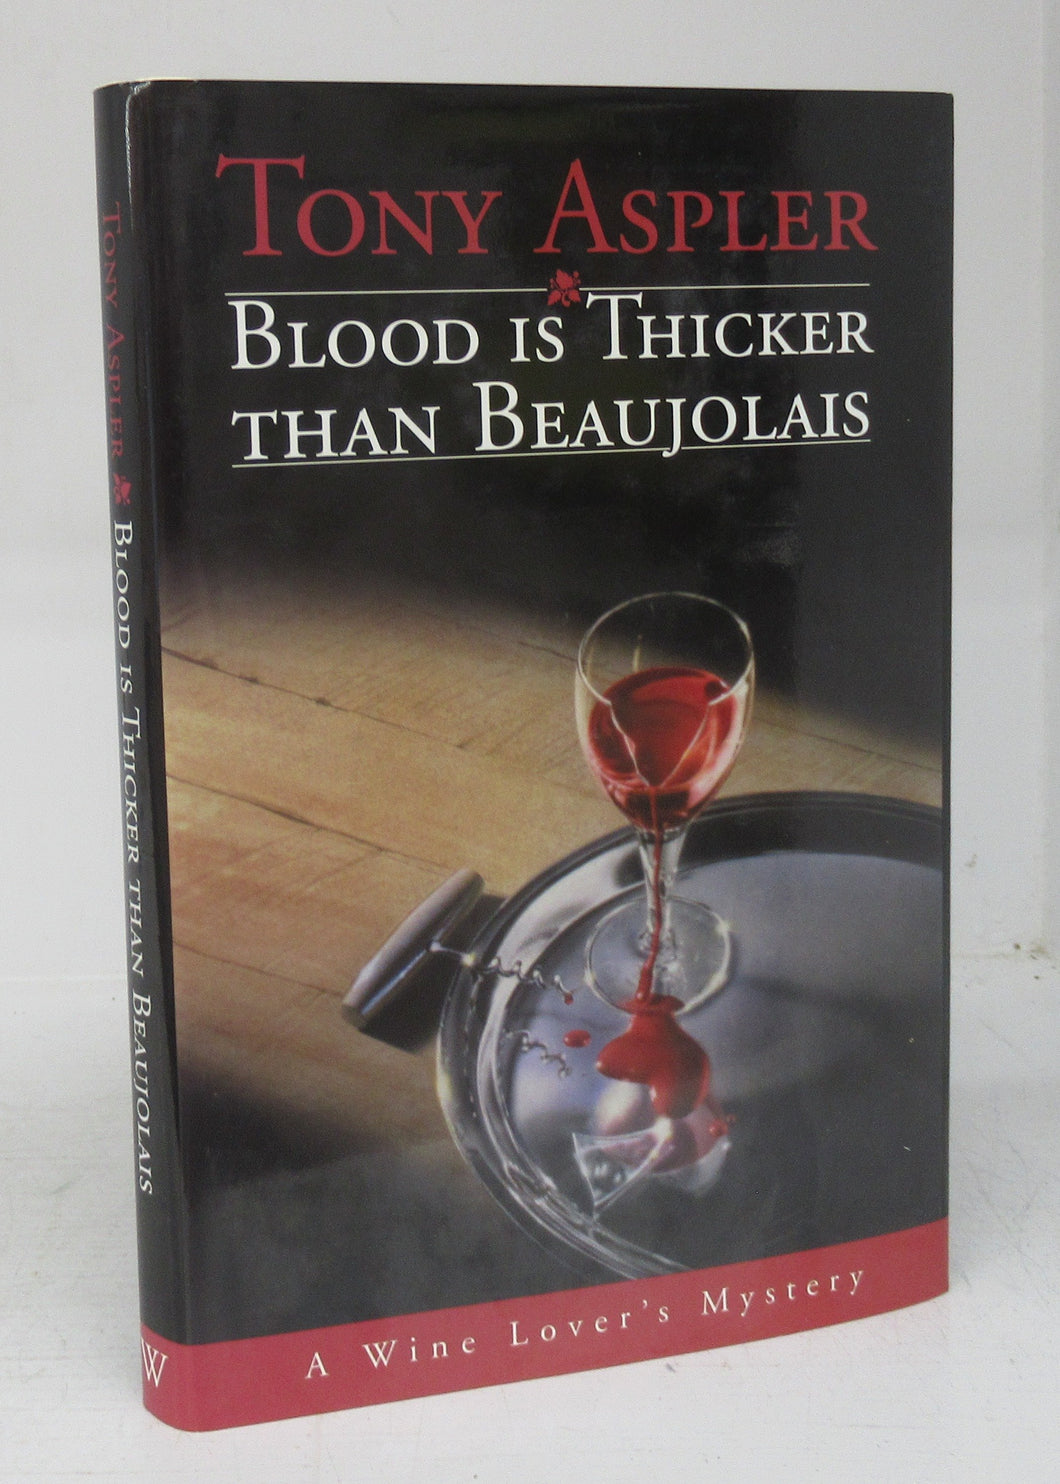 Blood is Thicker than Beaujolais